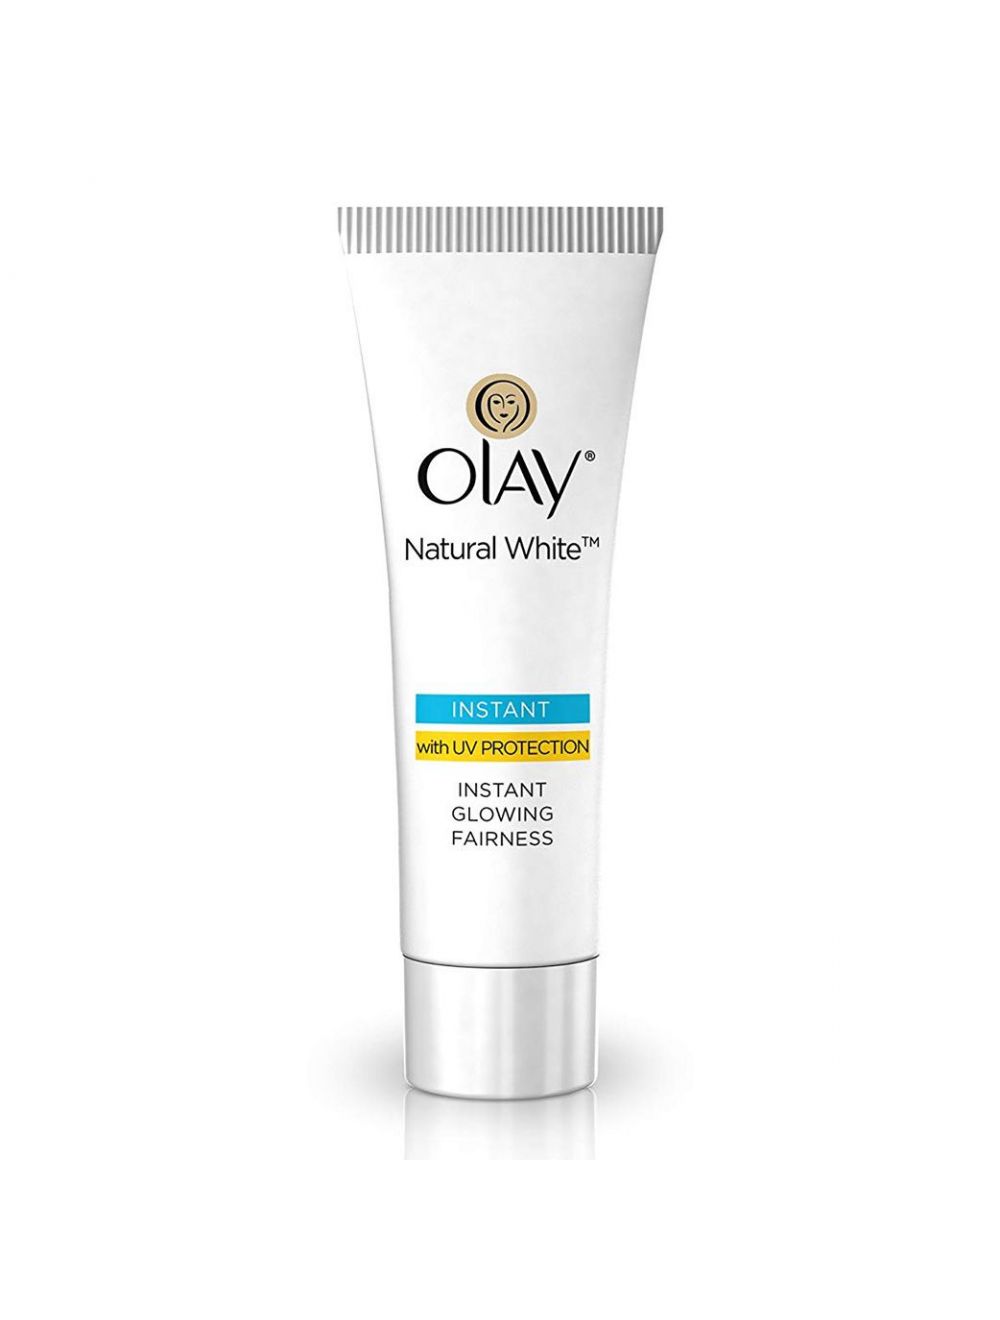 Olay Natural White Light Instant Glowing Fairness Cream (20gm)